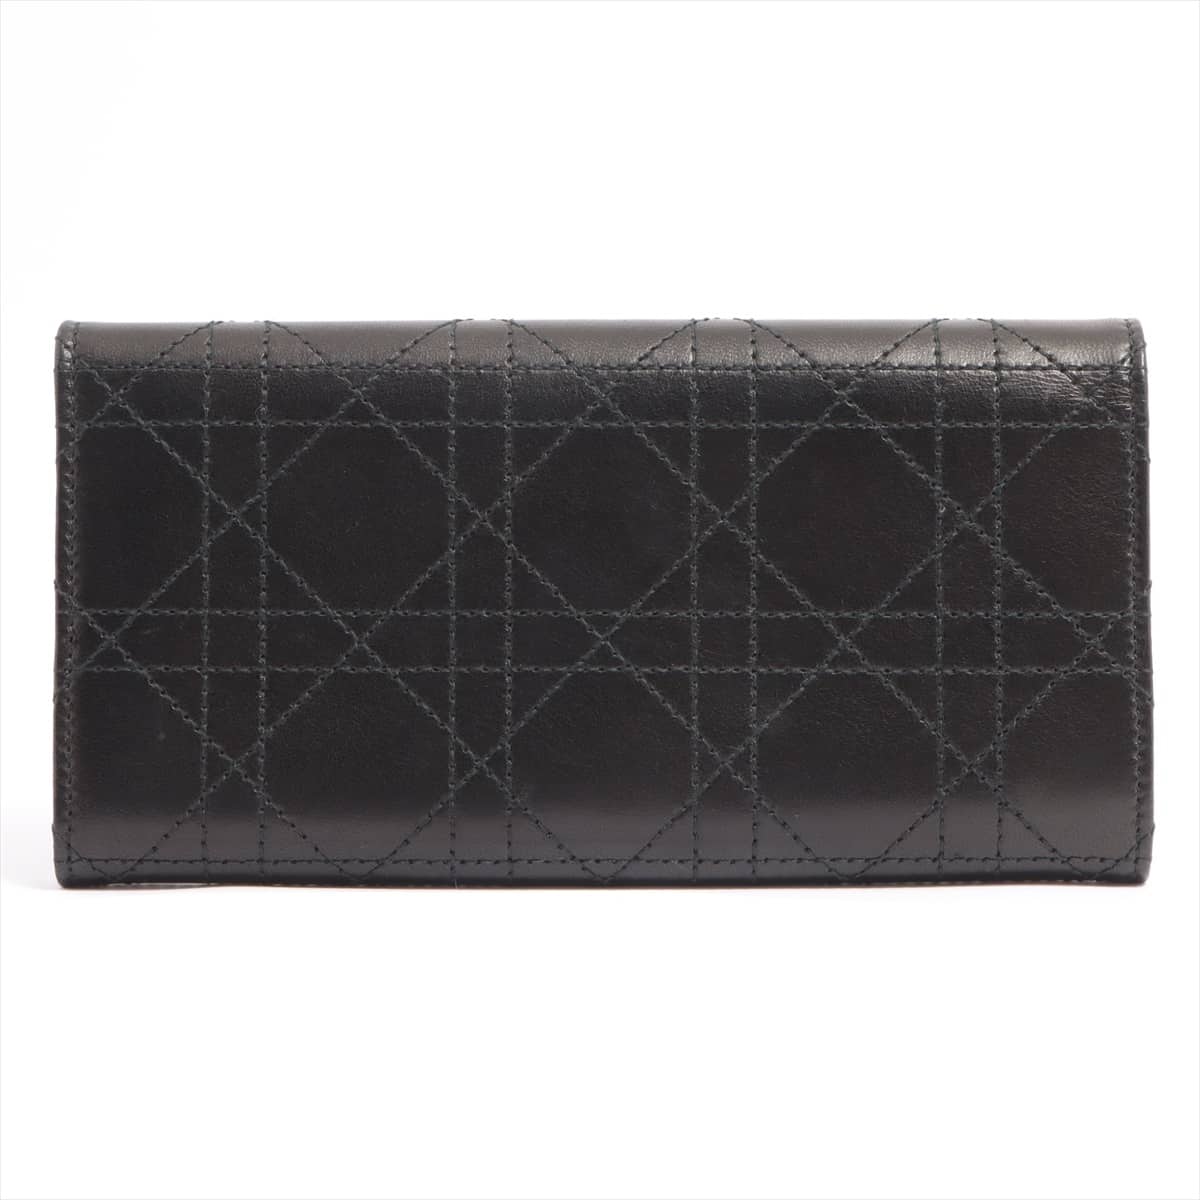 DIOR Lady Dior Cannage Leather Wallet Black